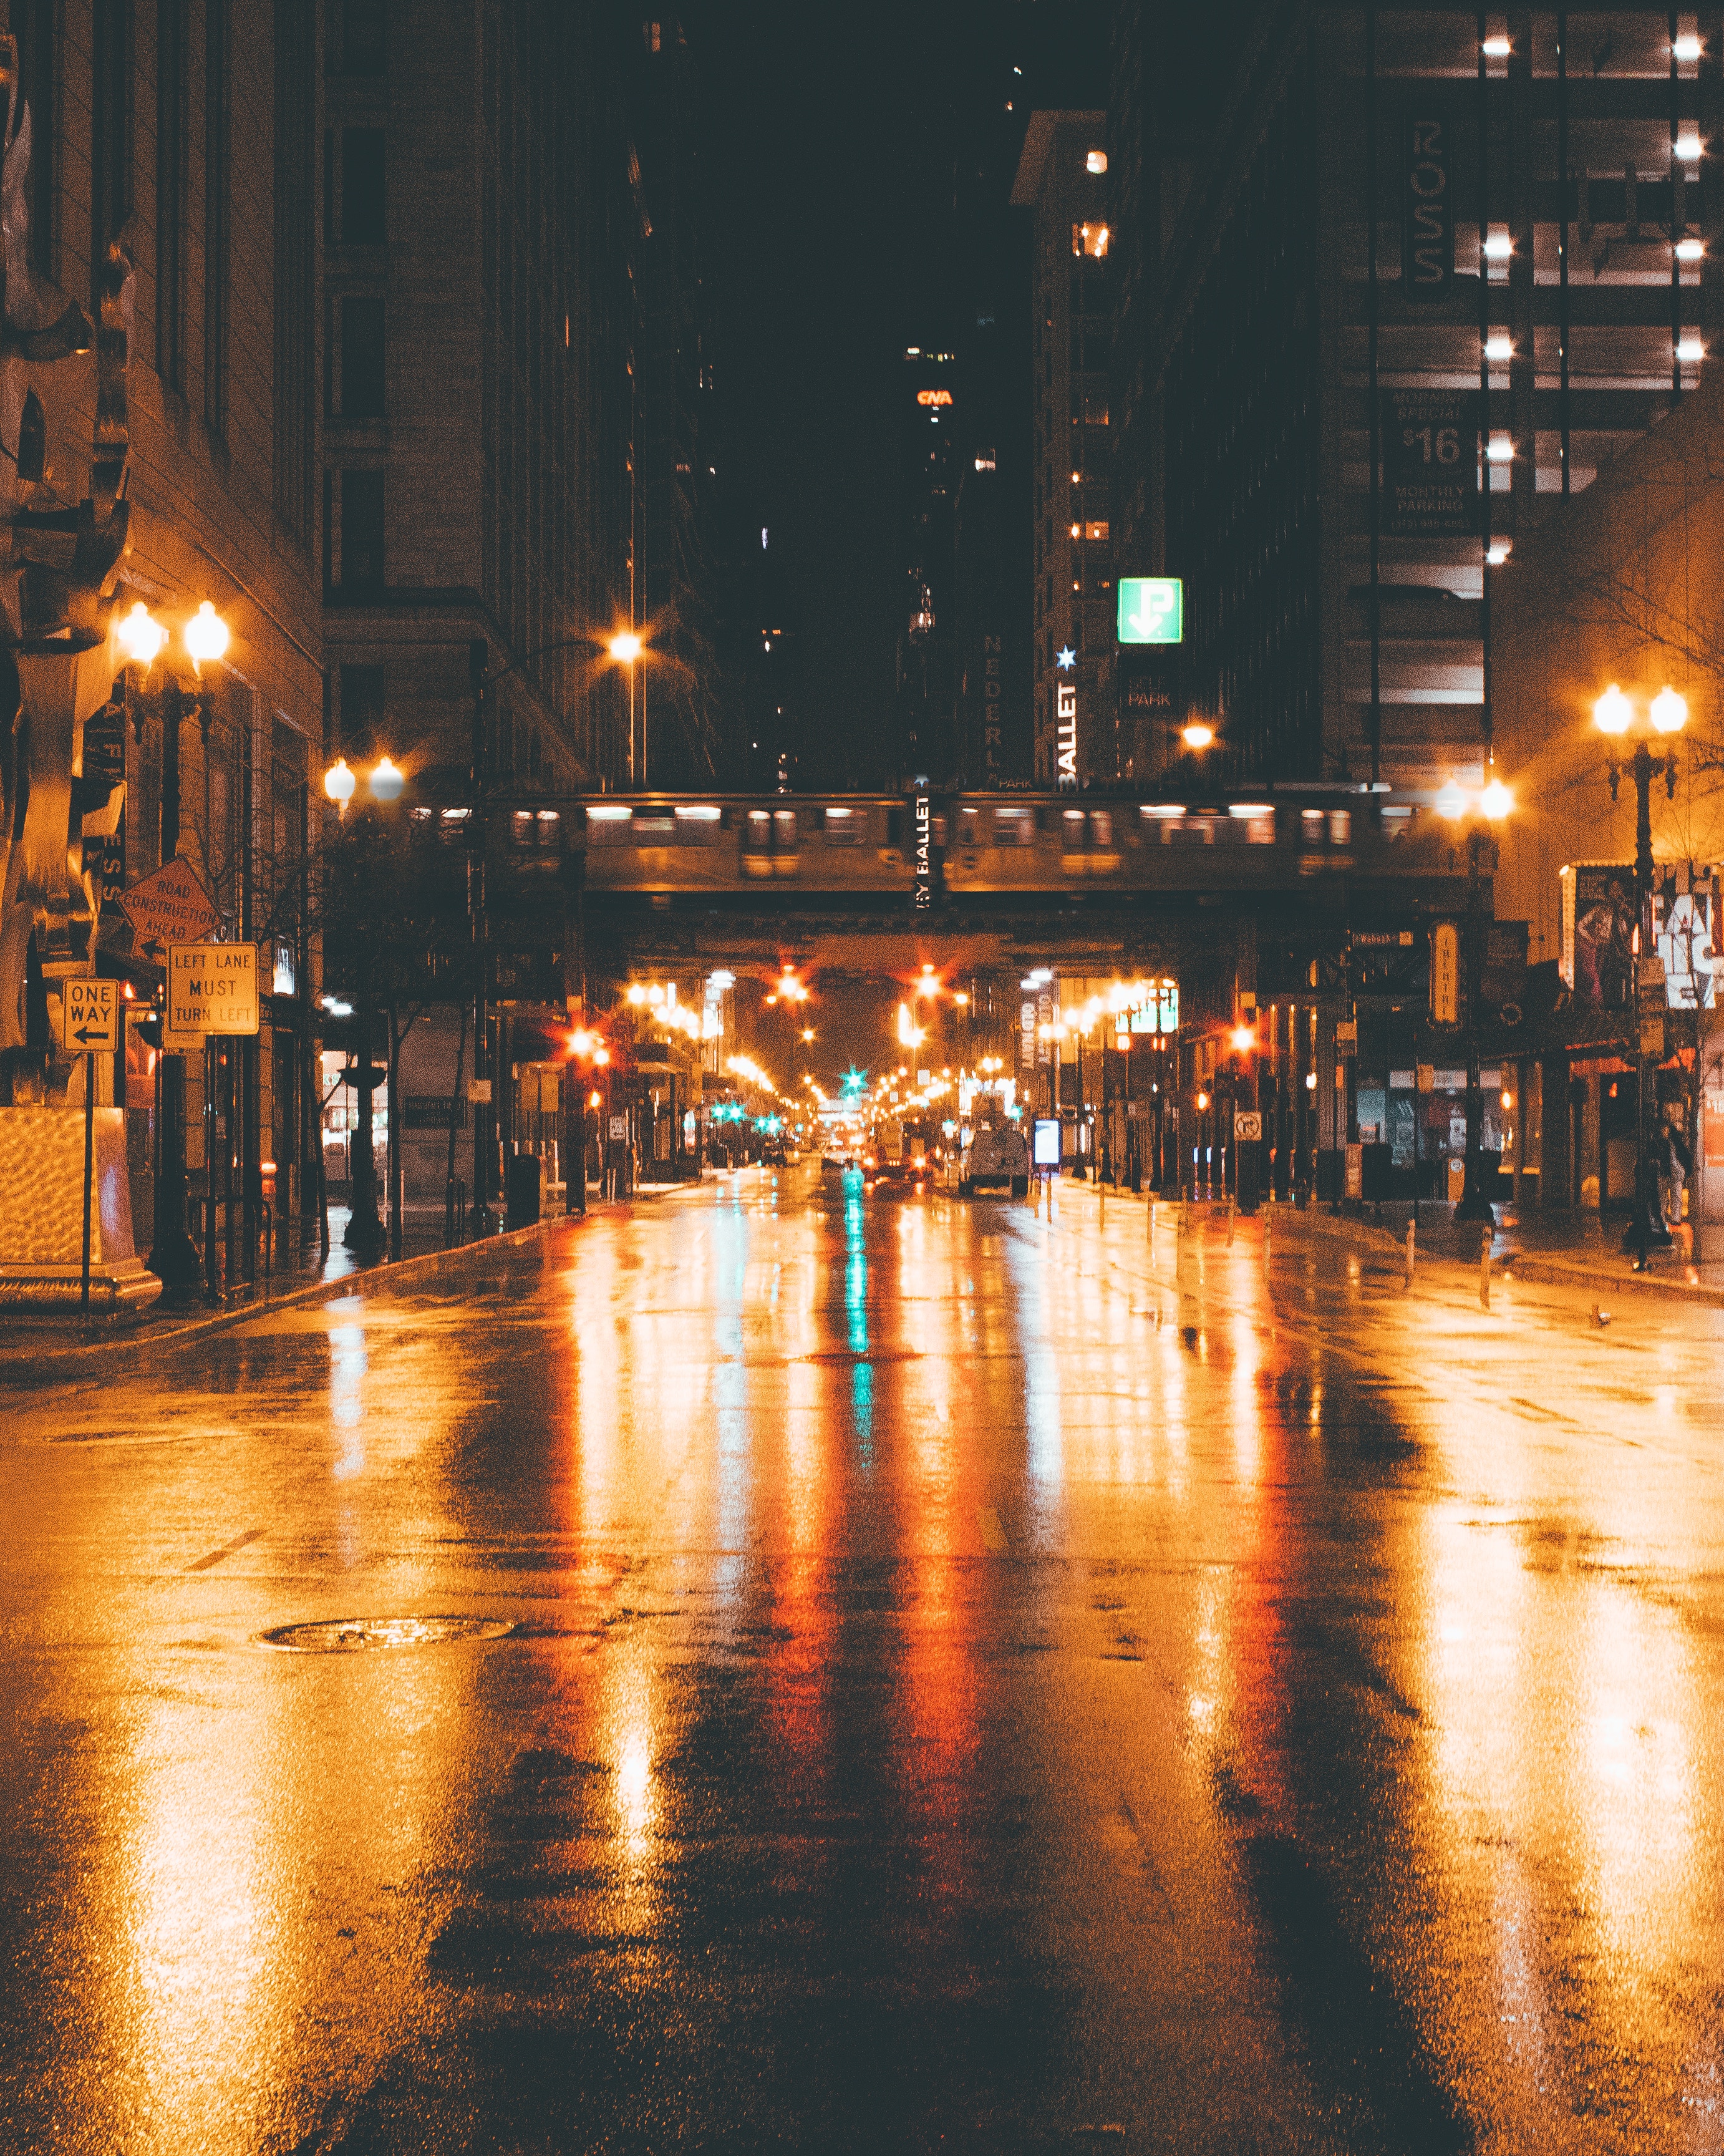 Aesthetic - City Evening - Street Background Wallpaper Download